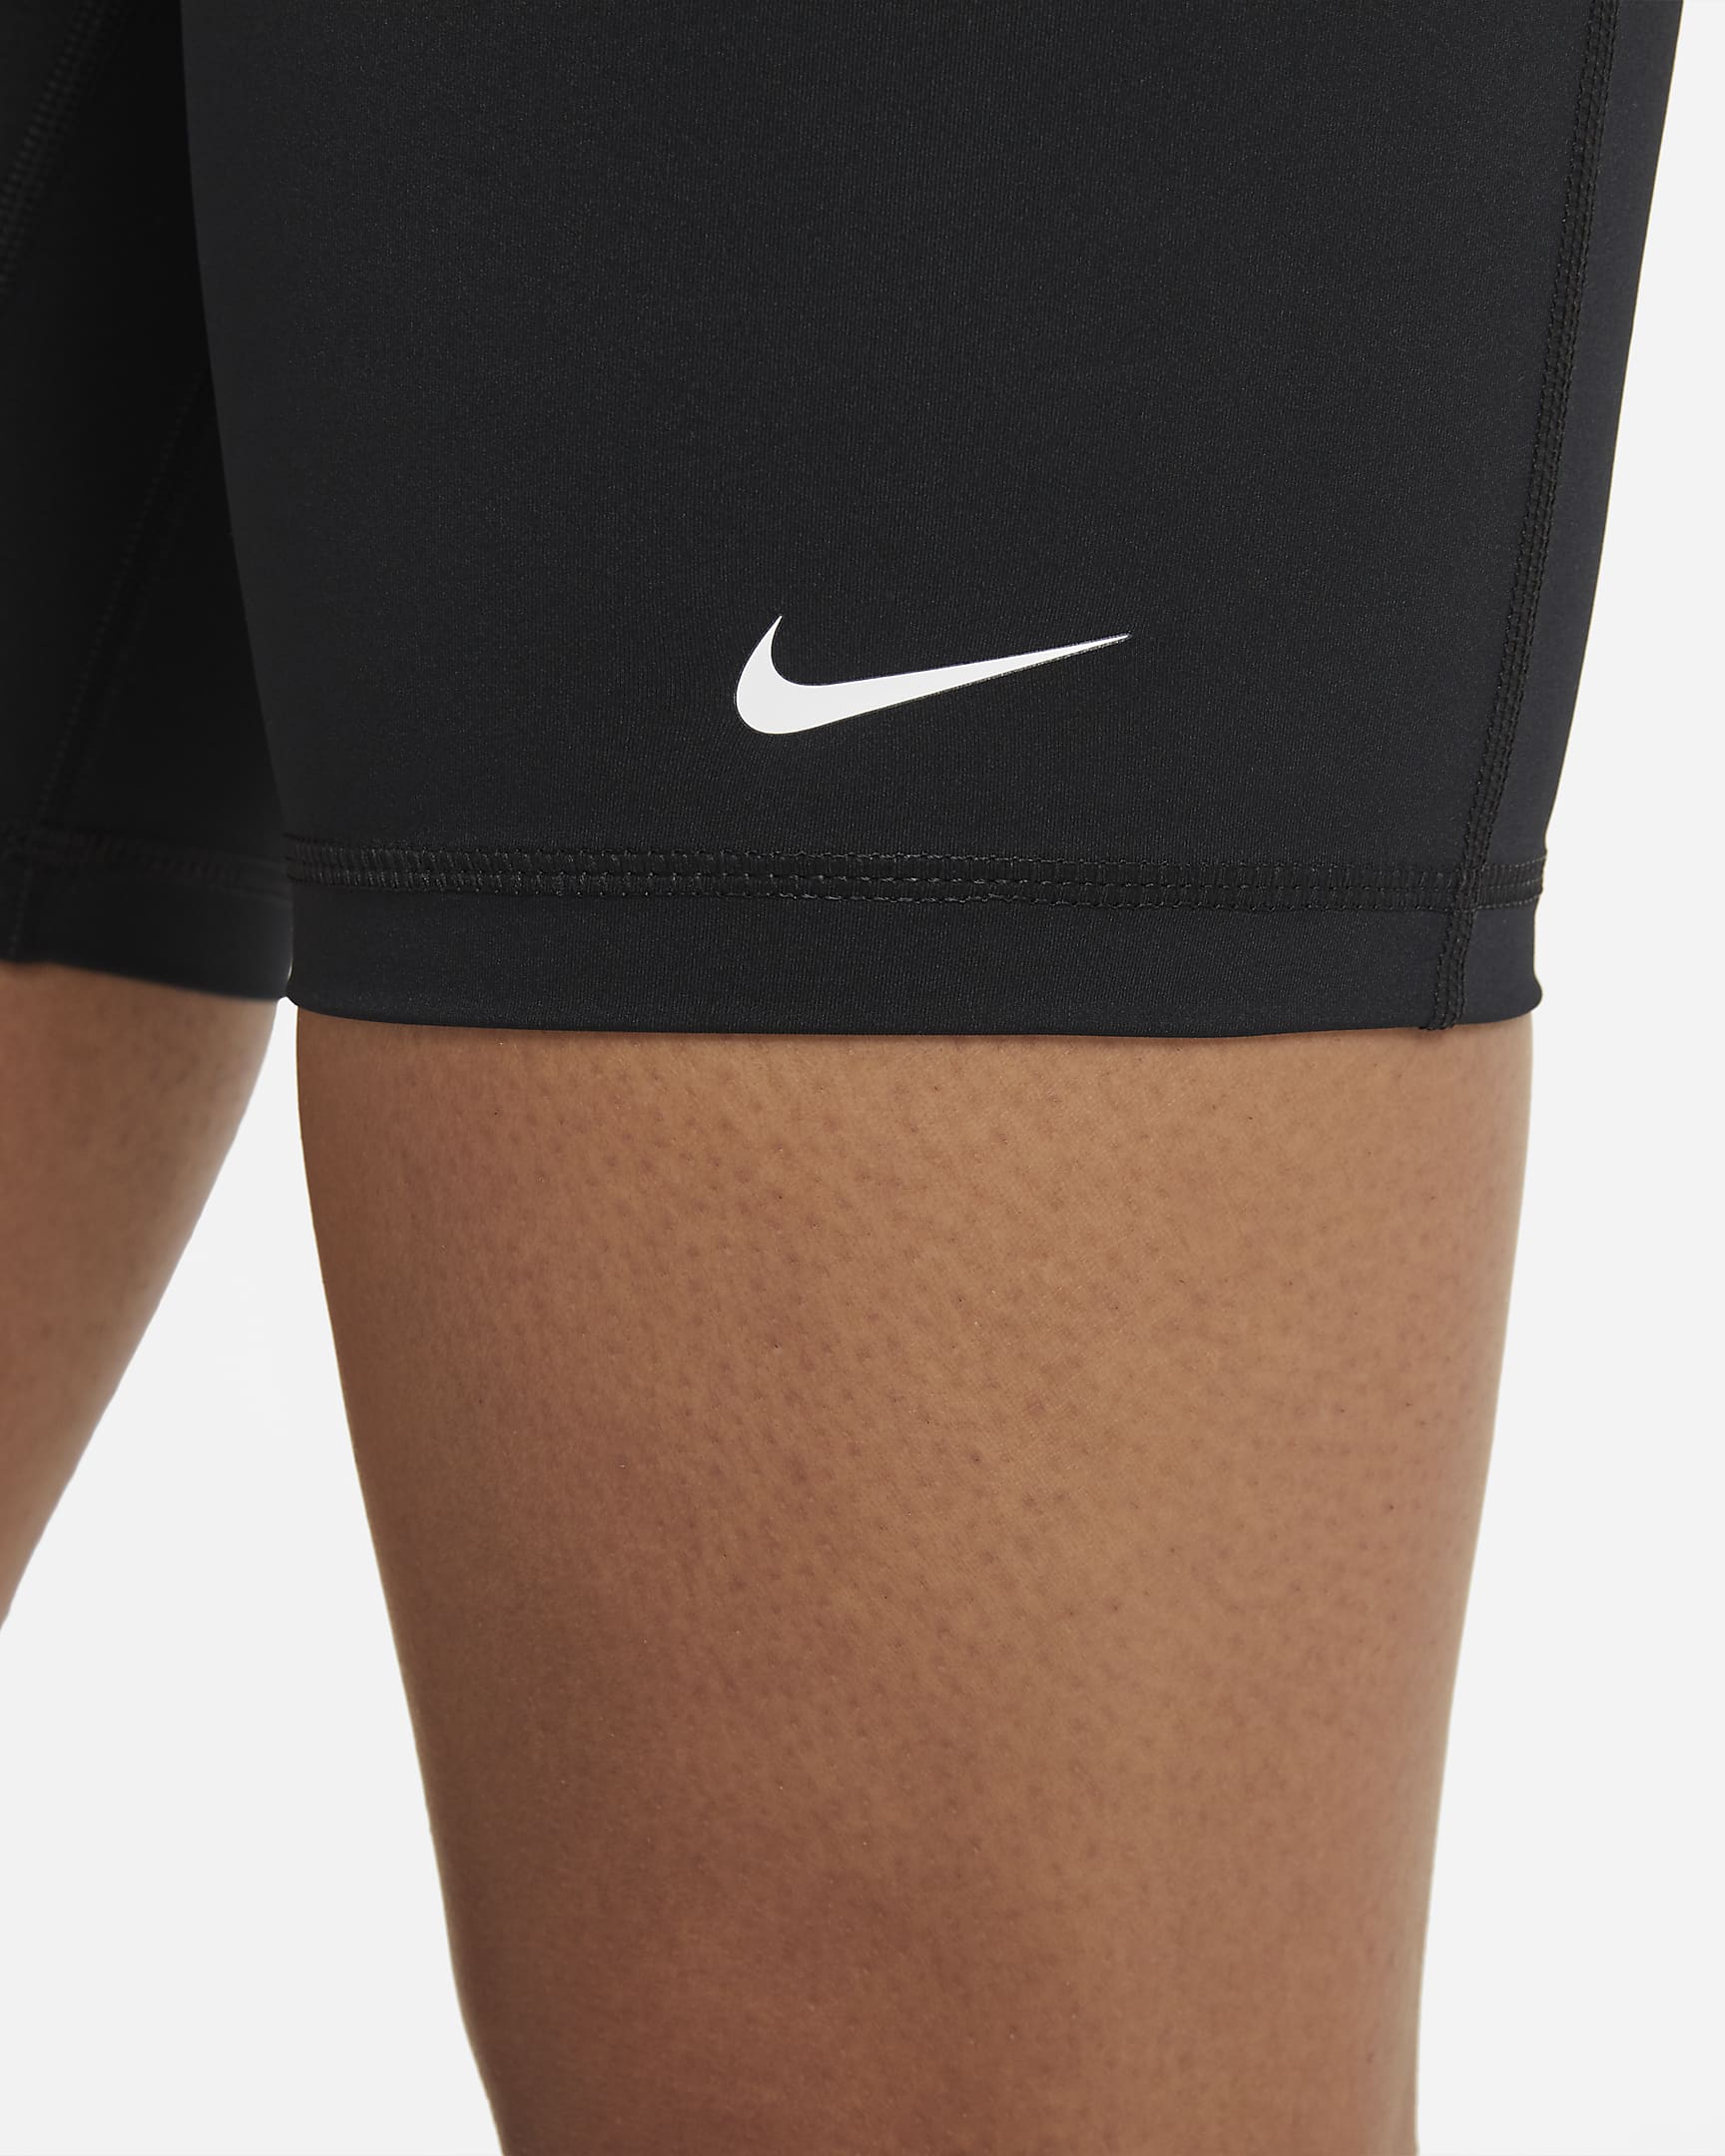 Nike Pro 365 Women's High-Waisted 18cm (approx.) Shorts - Black/White